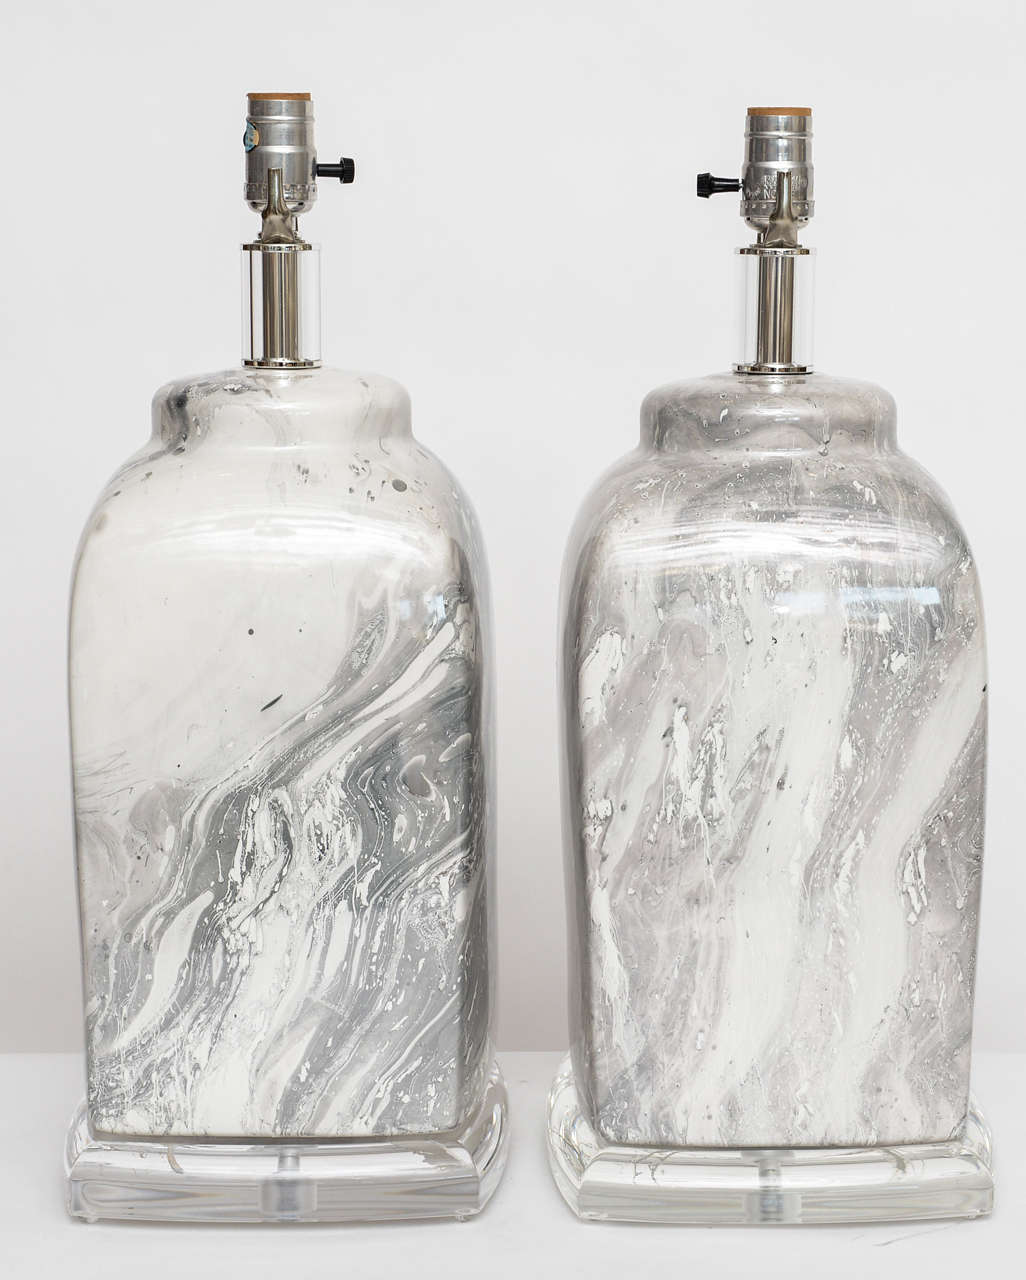 Whether on paper, furniture, or accessories, we are such fans of marbling. This dreamy pair of 70's glazed ceramic lamps have grey-on-white marbling with lucite bases and finials. Height measurement below is to top of socket. (Shades not included.)